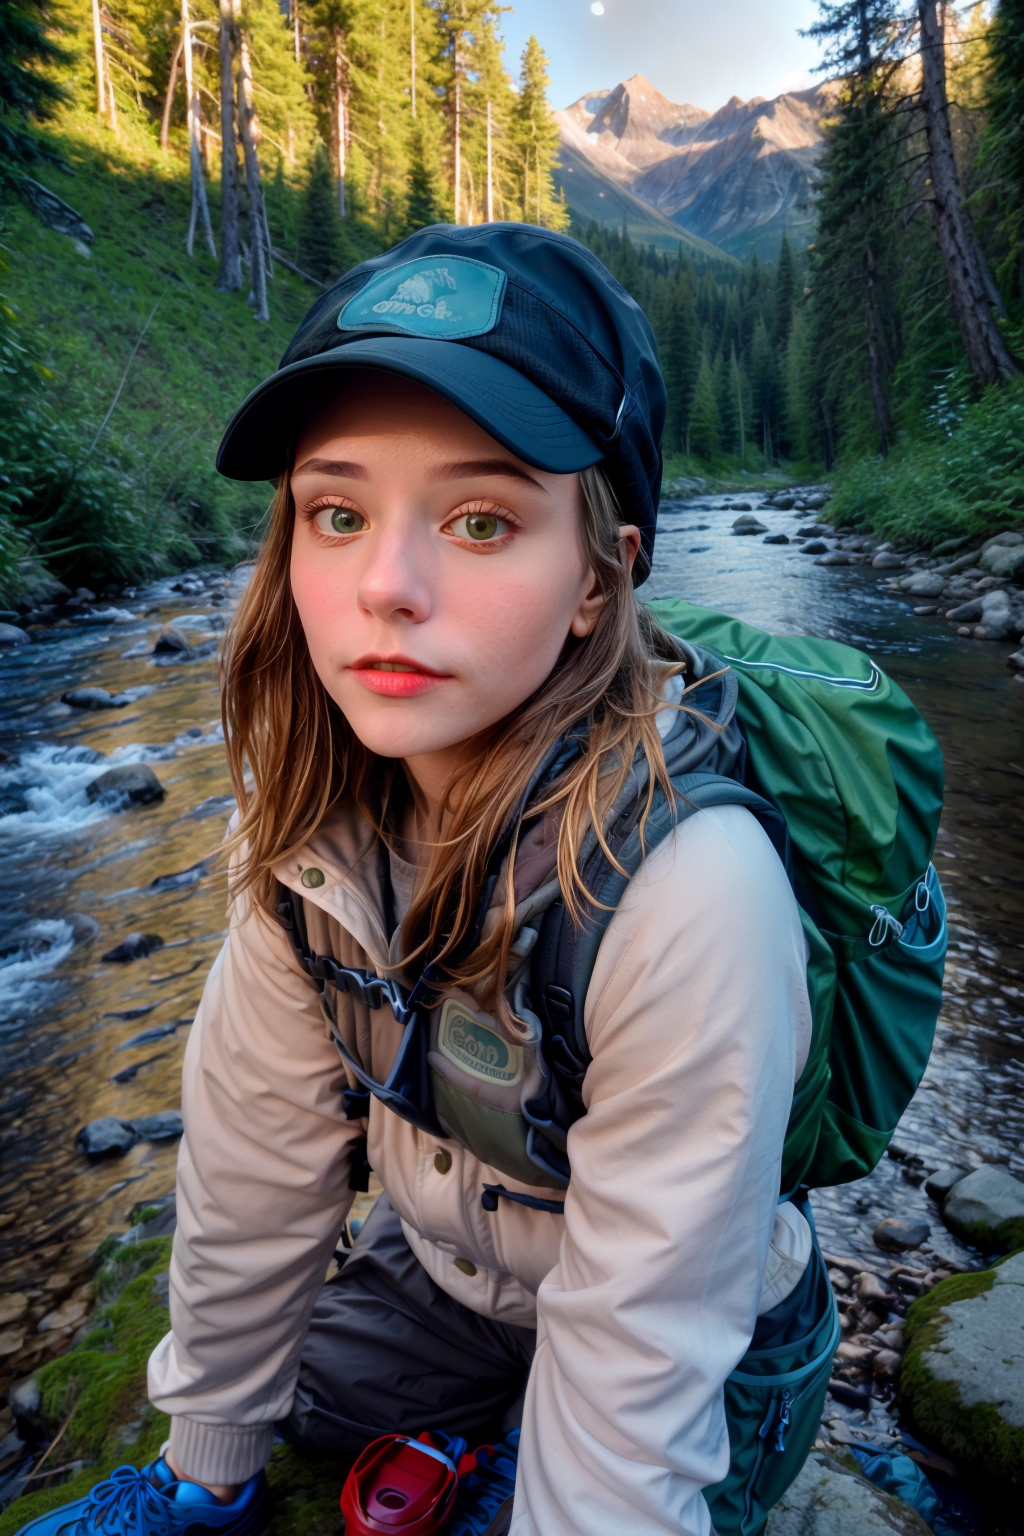 Young Woman with Green Backpack and Hiking Gear Sitting by a Stream